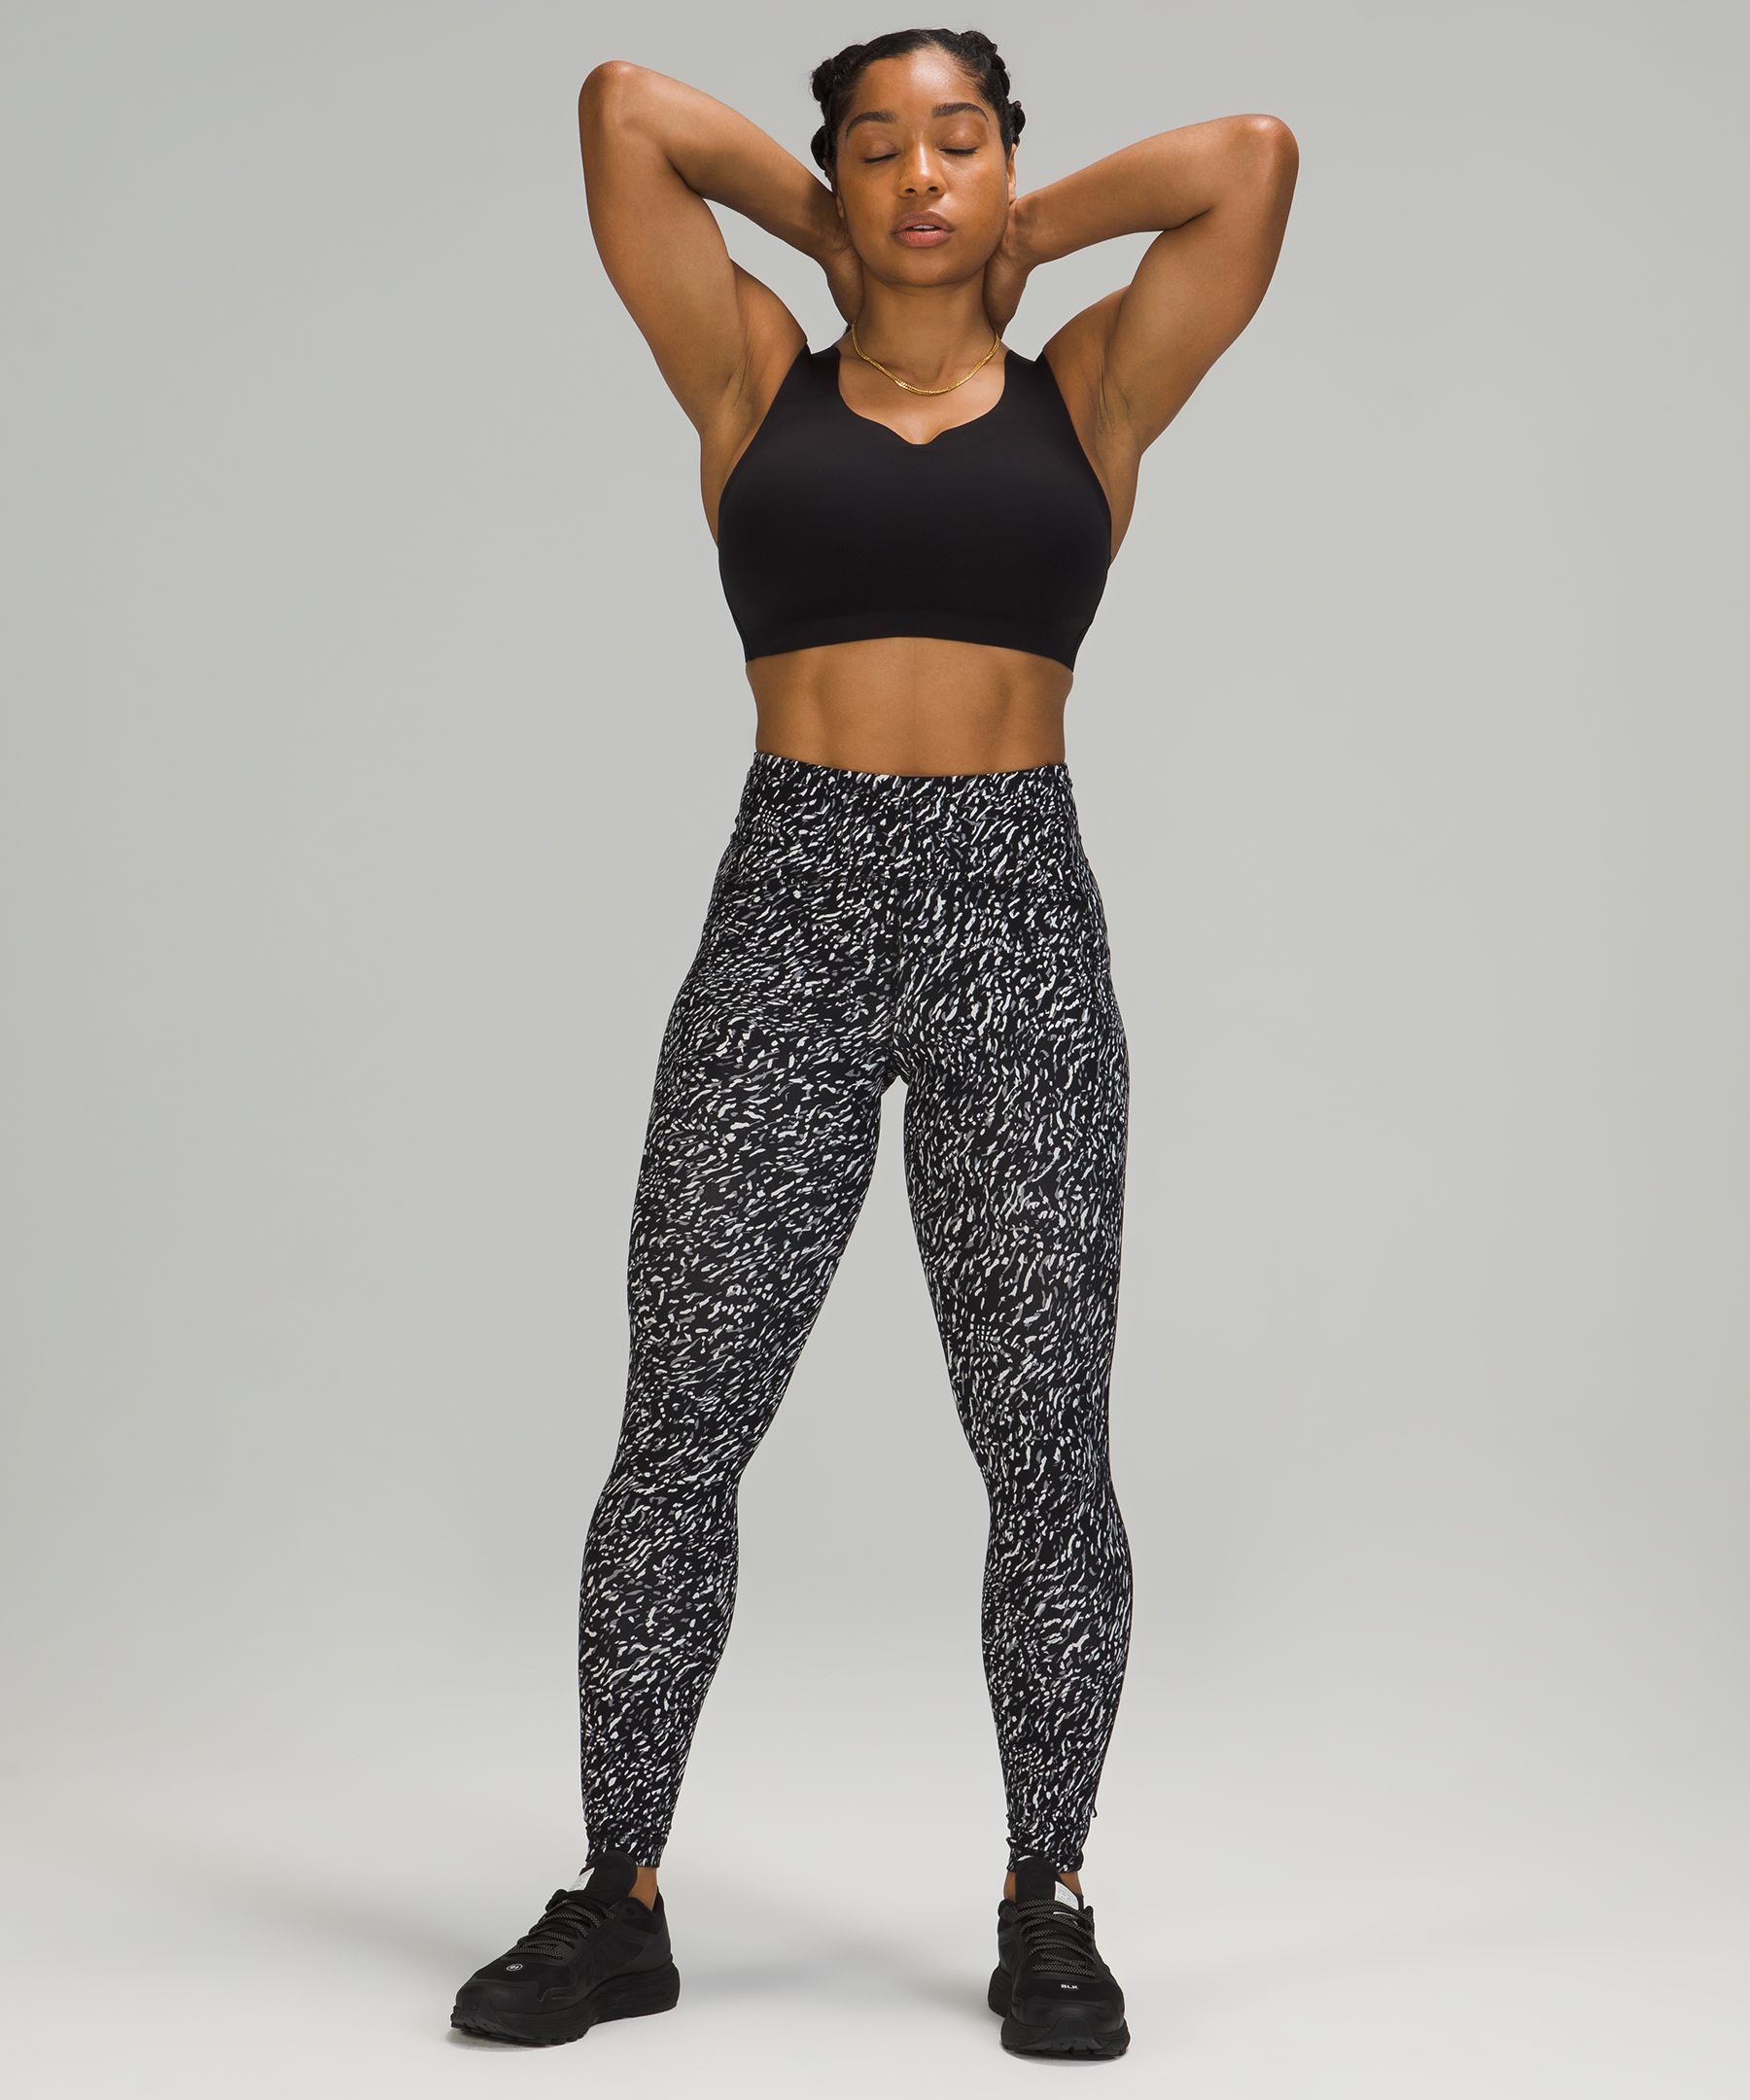 Best Printed Workout Leggings With